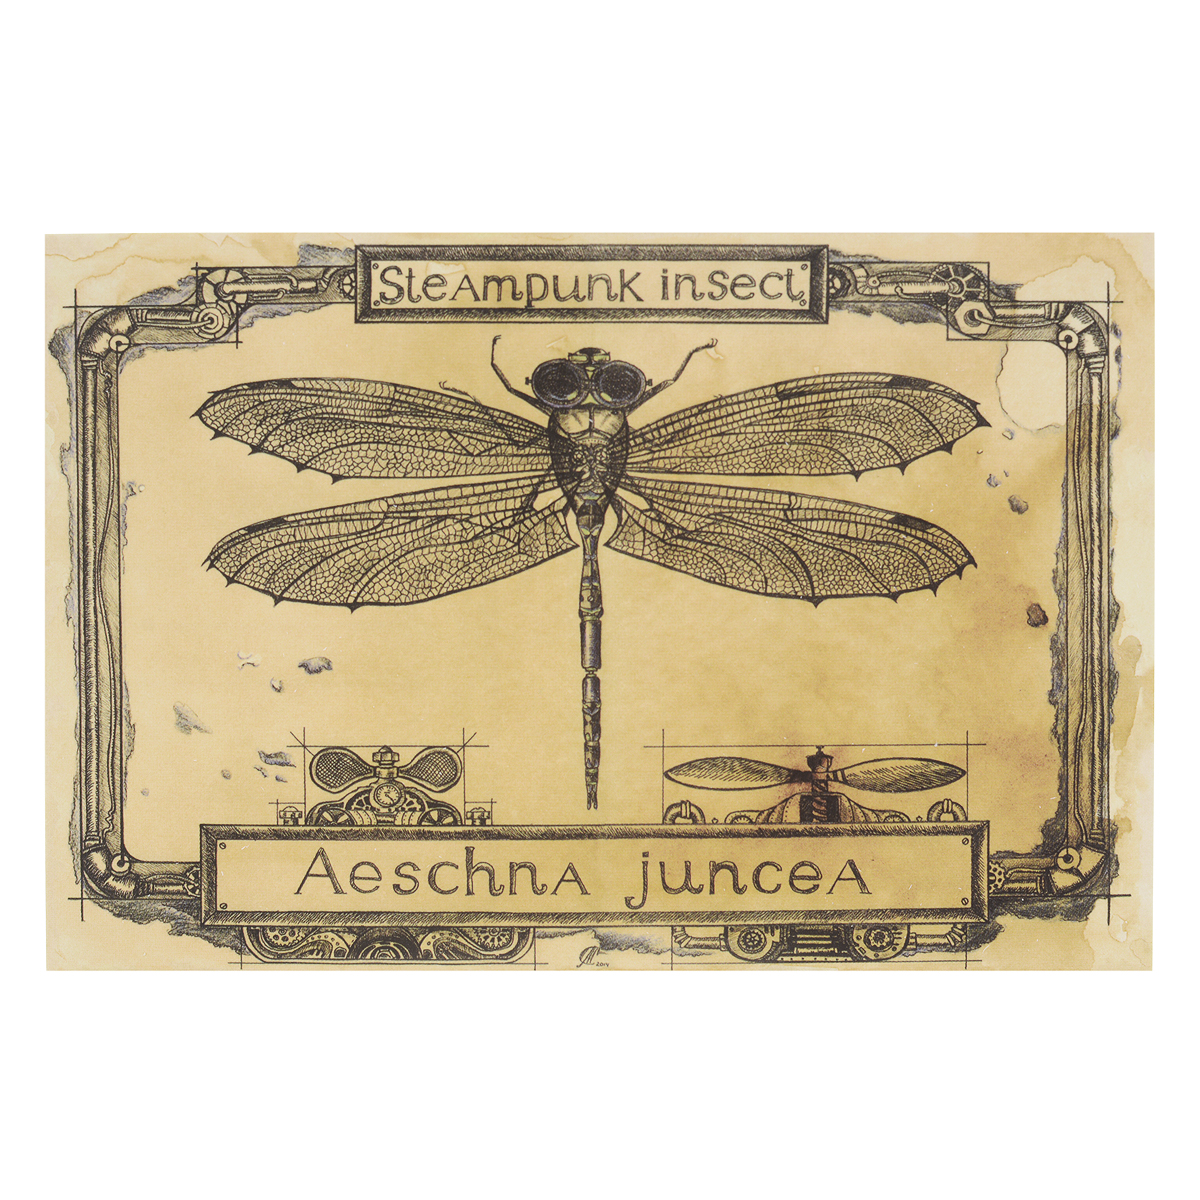  Steampunk Insect. .    - CardsPoint / SM10-003      Steampunk Insect     .         .           , , ,        .